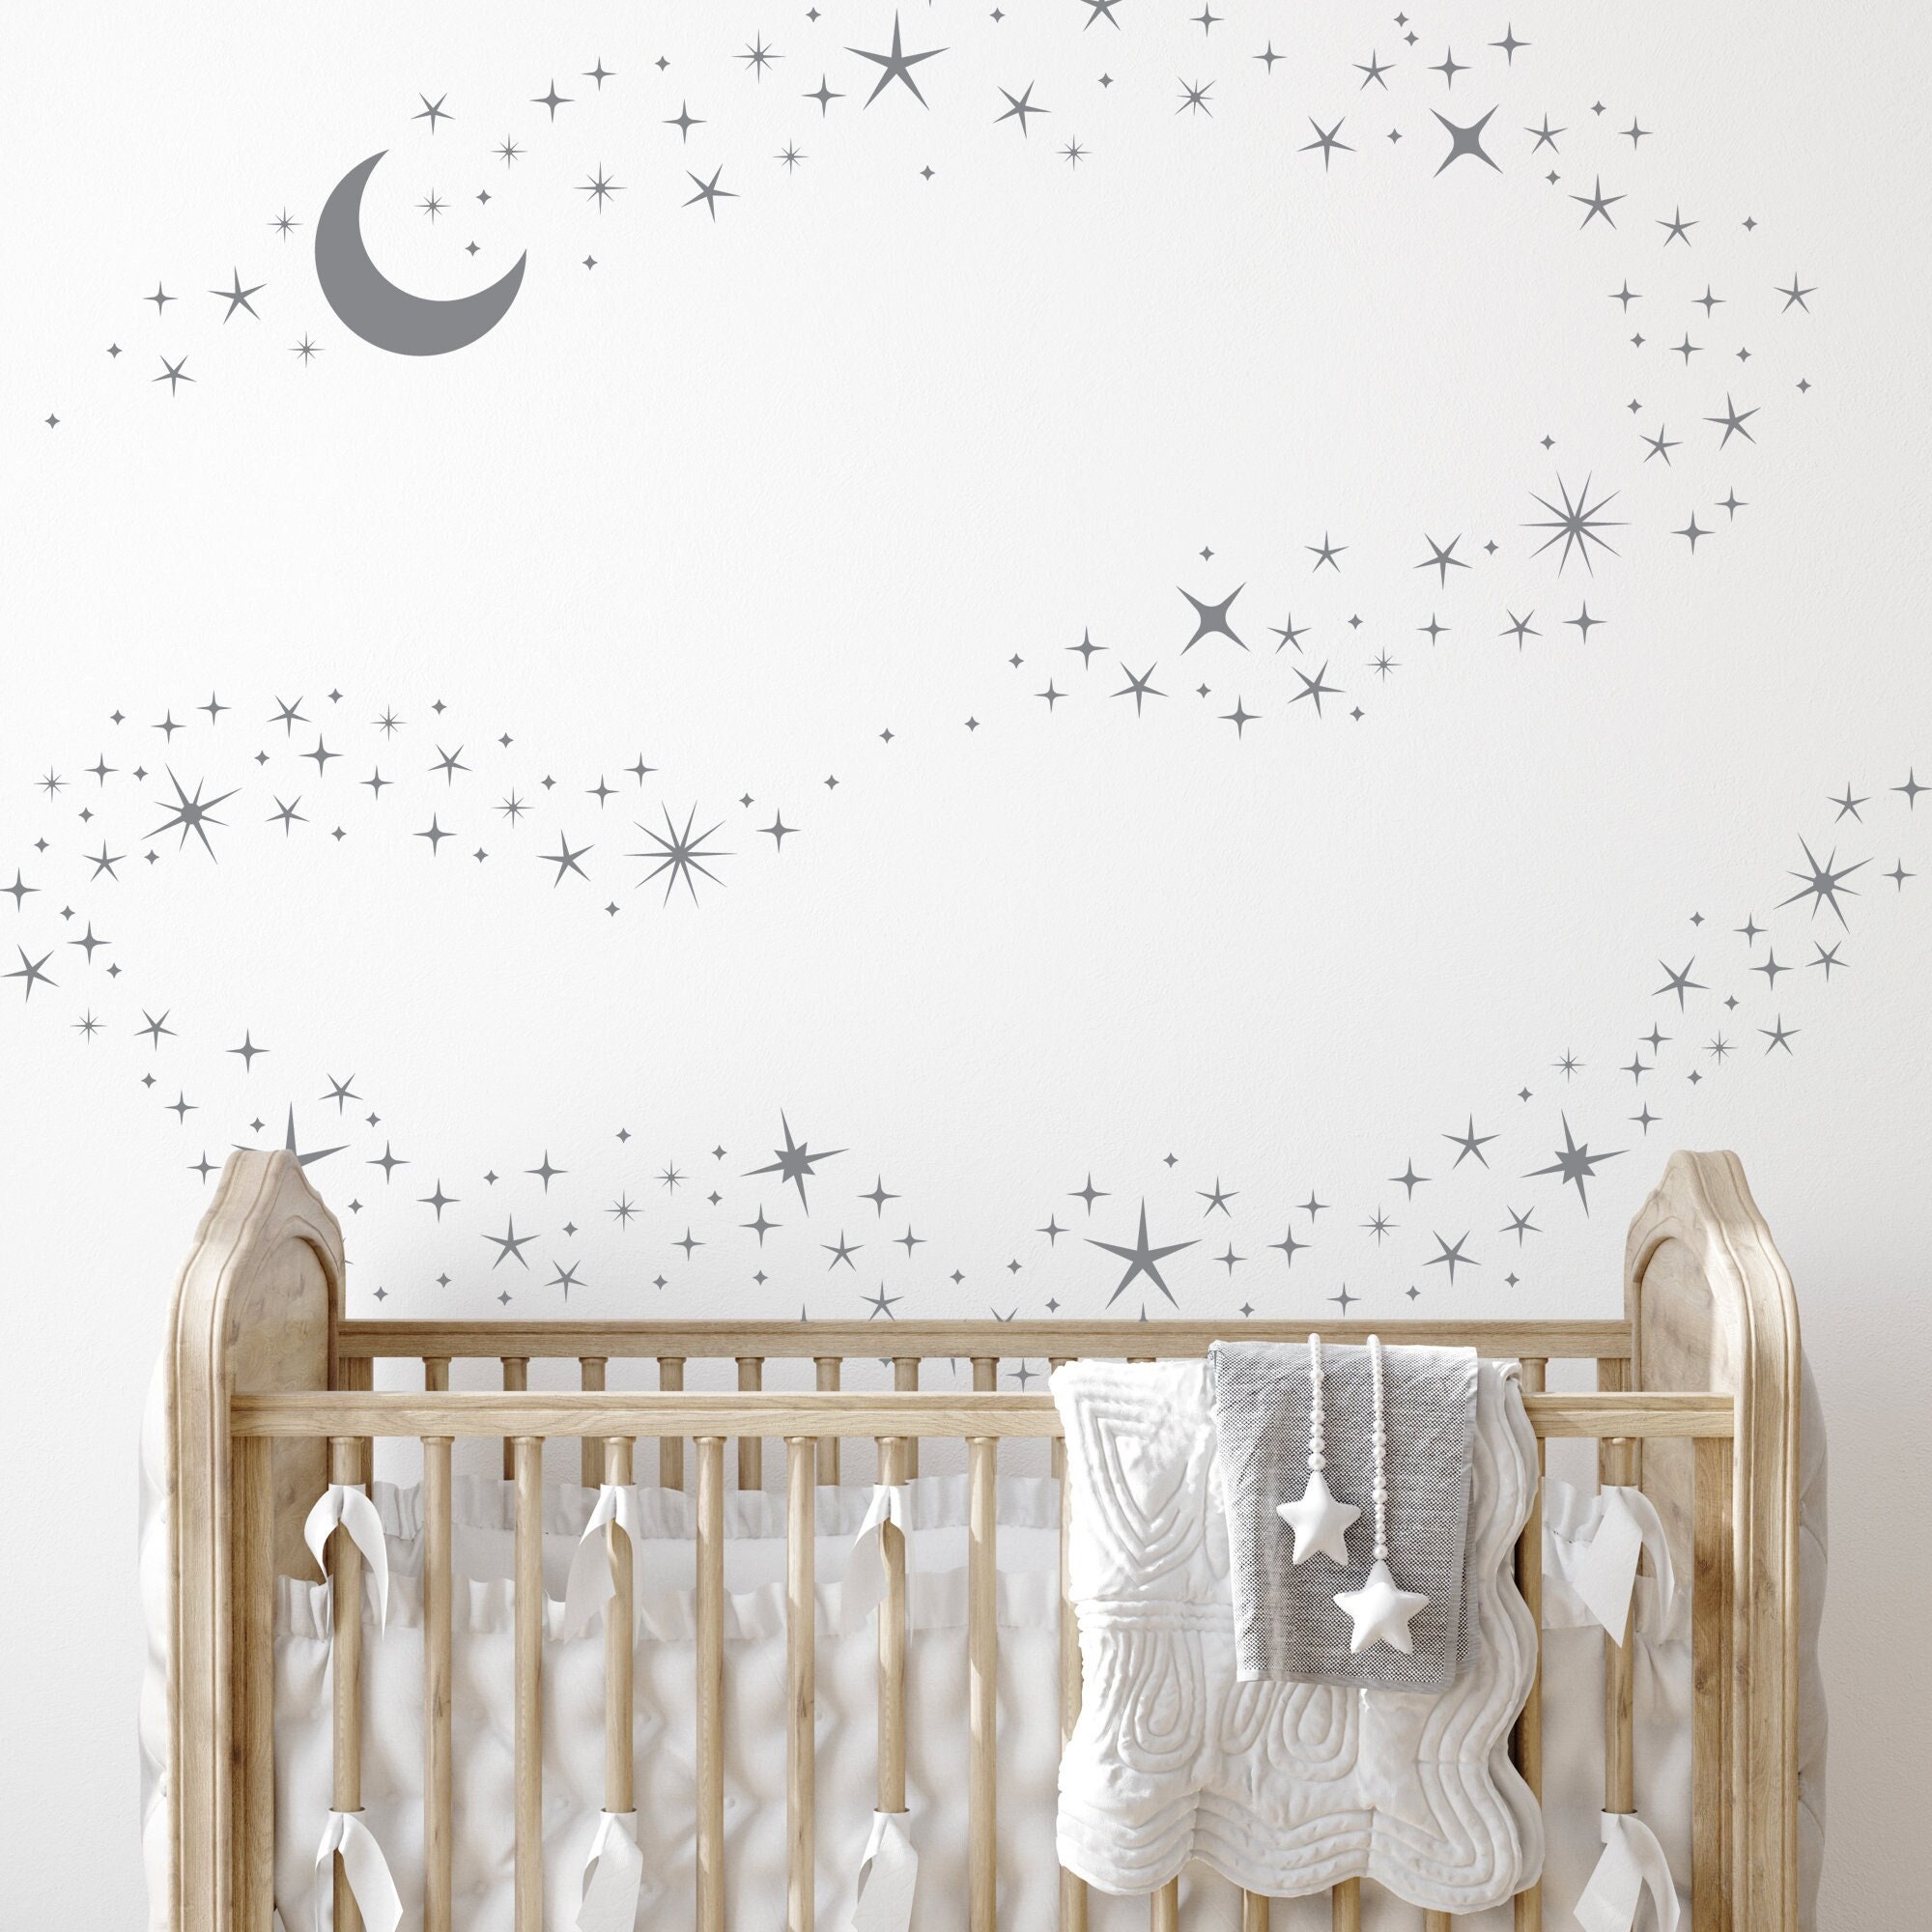 GOLD Stars Wall Decals, Mixed Set of 90 Mini Sized Star Wall Stickers  Gold-metallic, Star Mix From 0.8'' up to 1.6'', Kidsroom Decal & Decor 